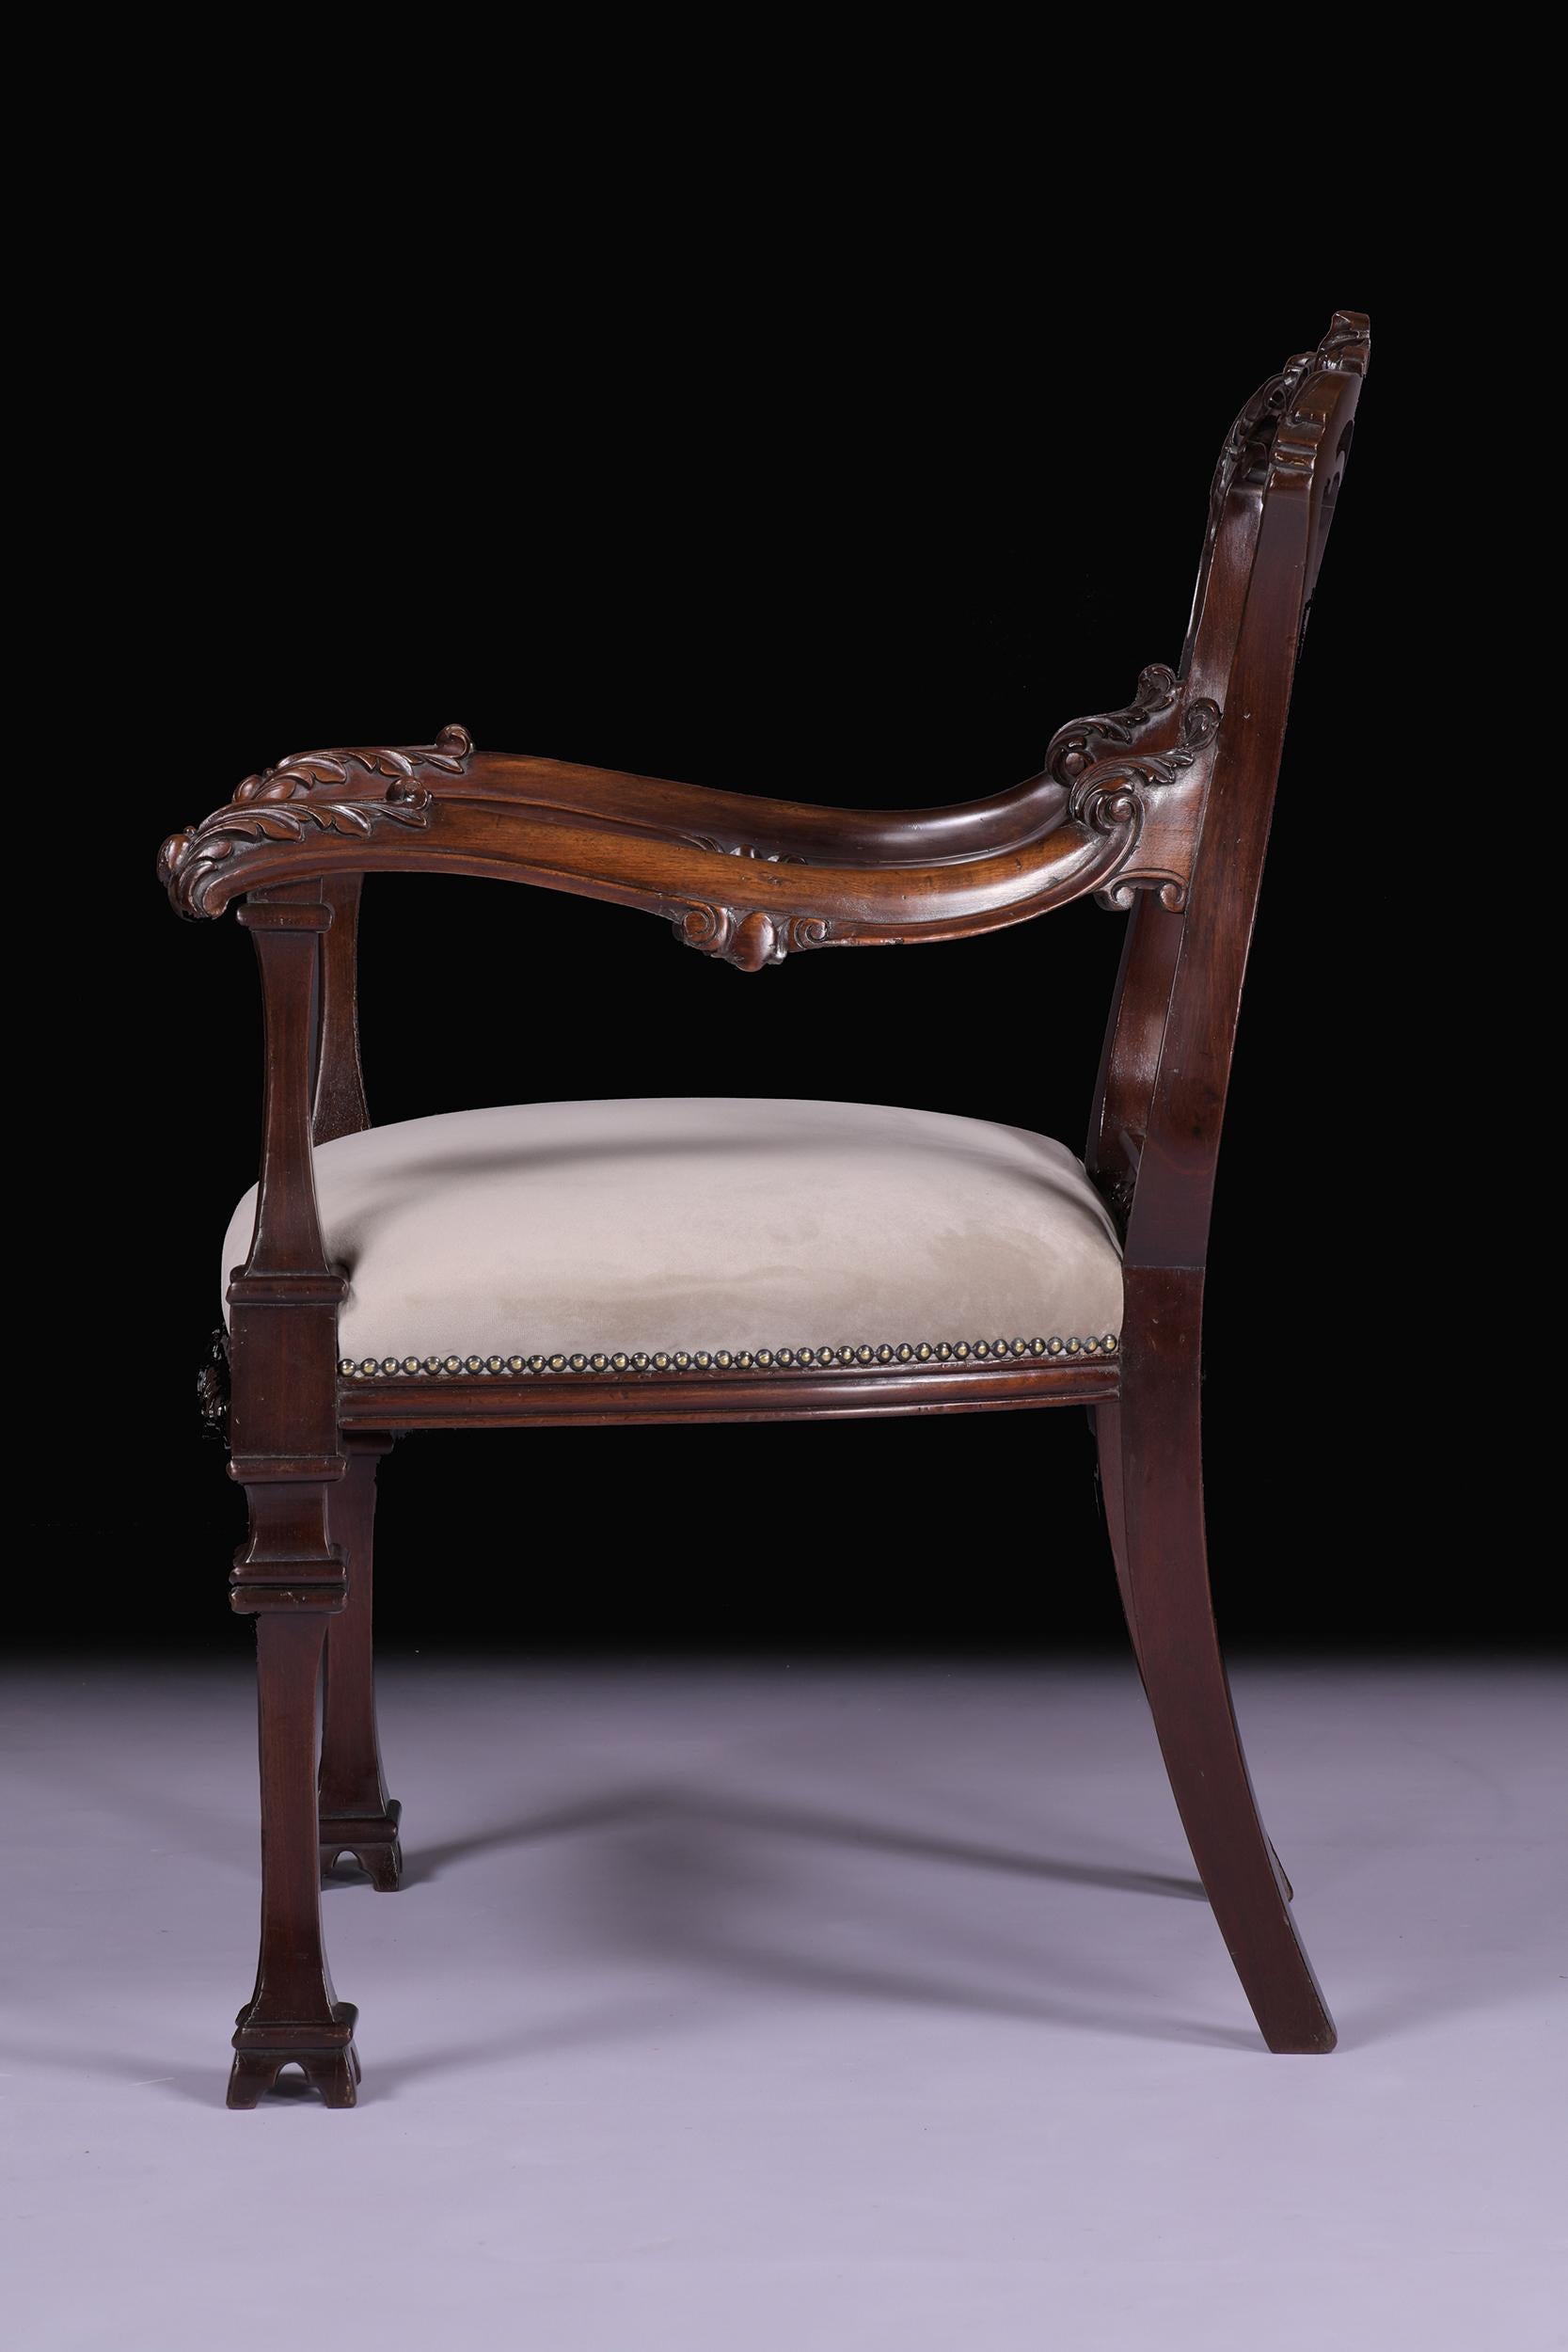 Pair Of 19th Century English Armchairs In The Chinese Chippendale Style For Sale 2